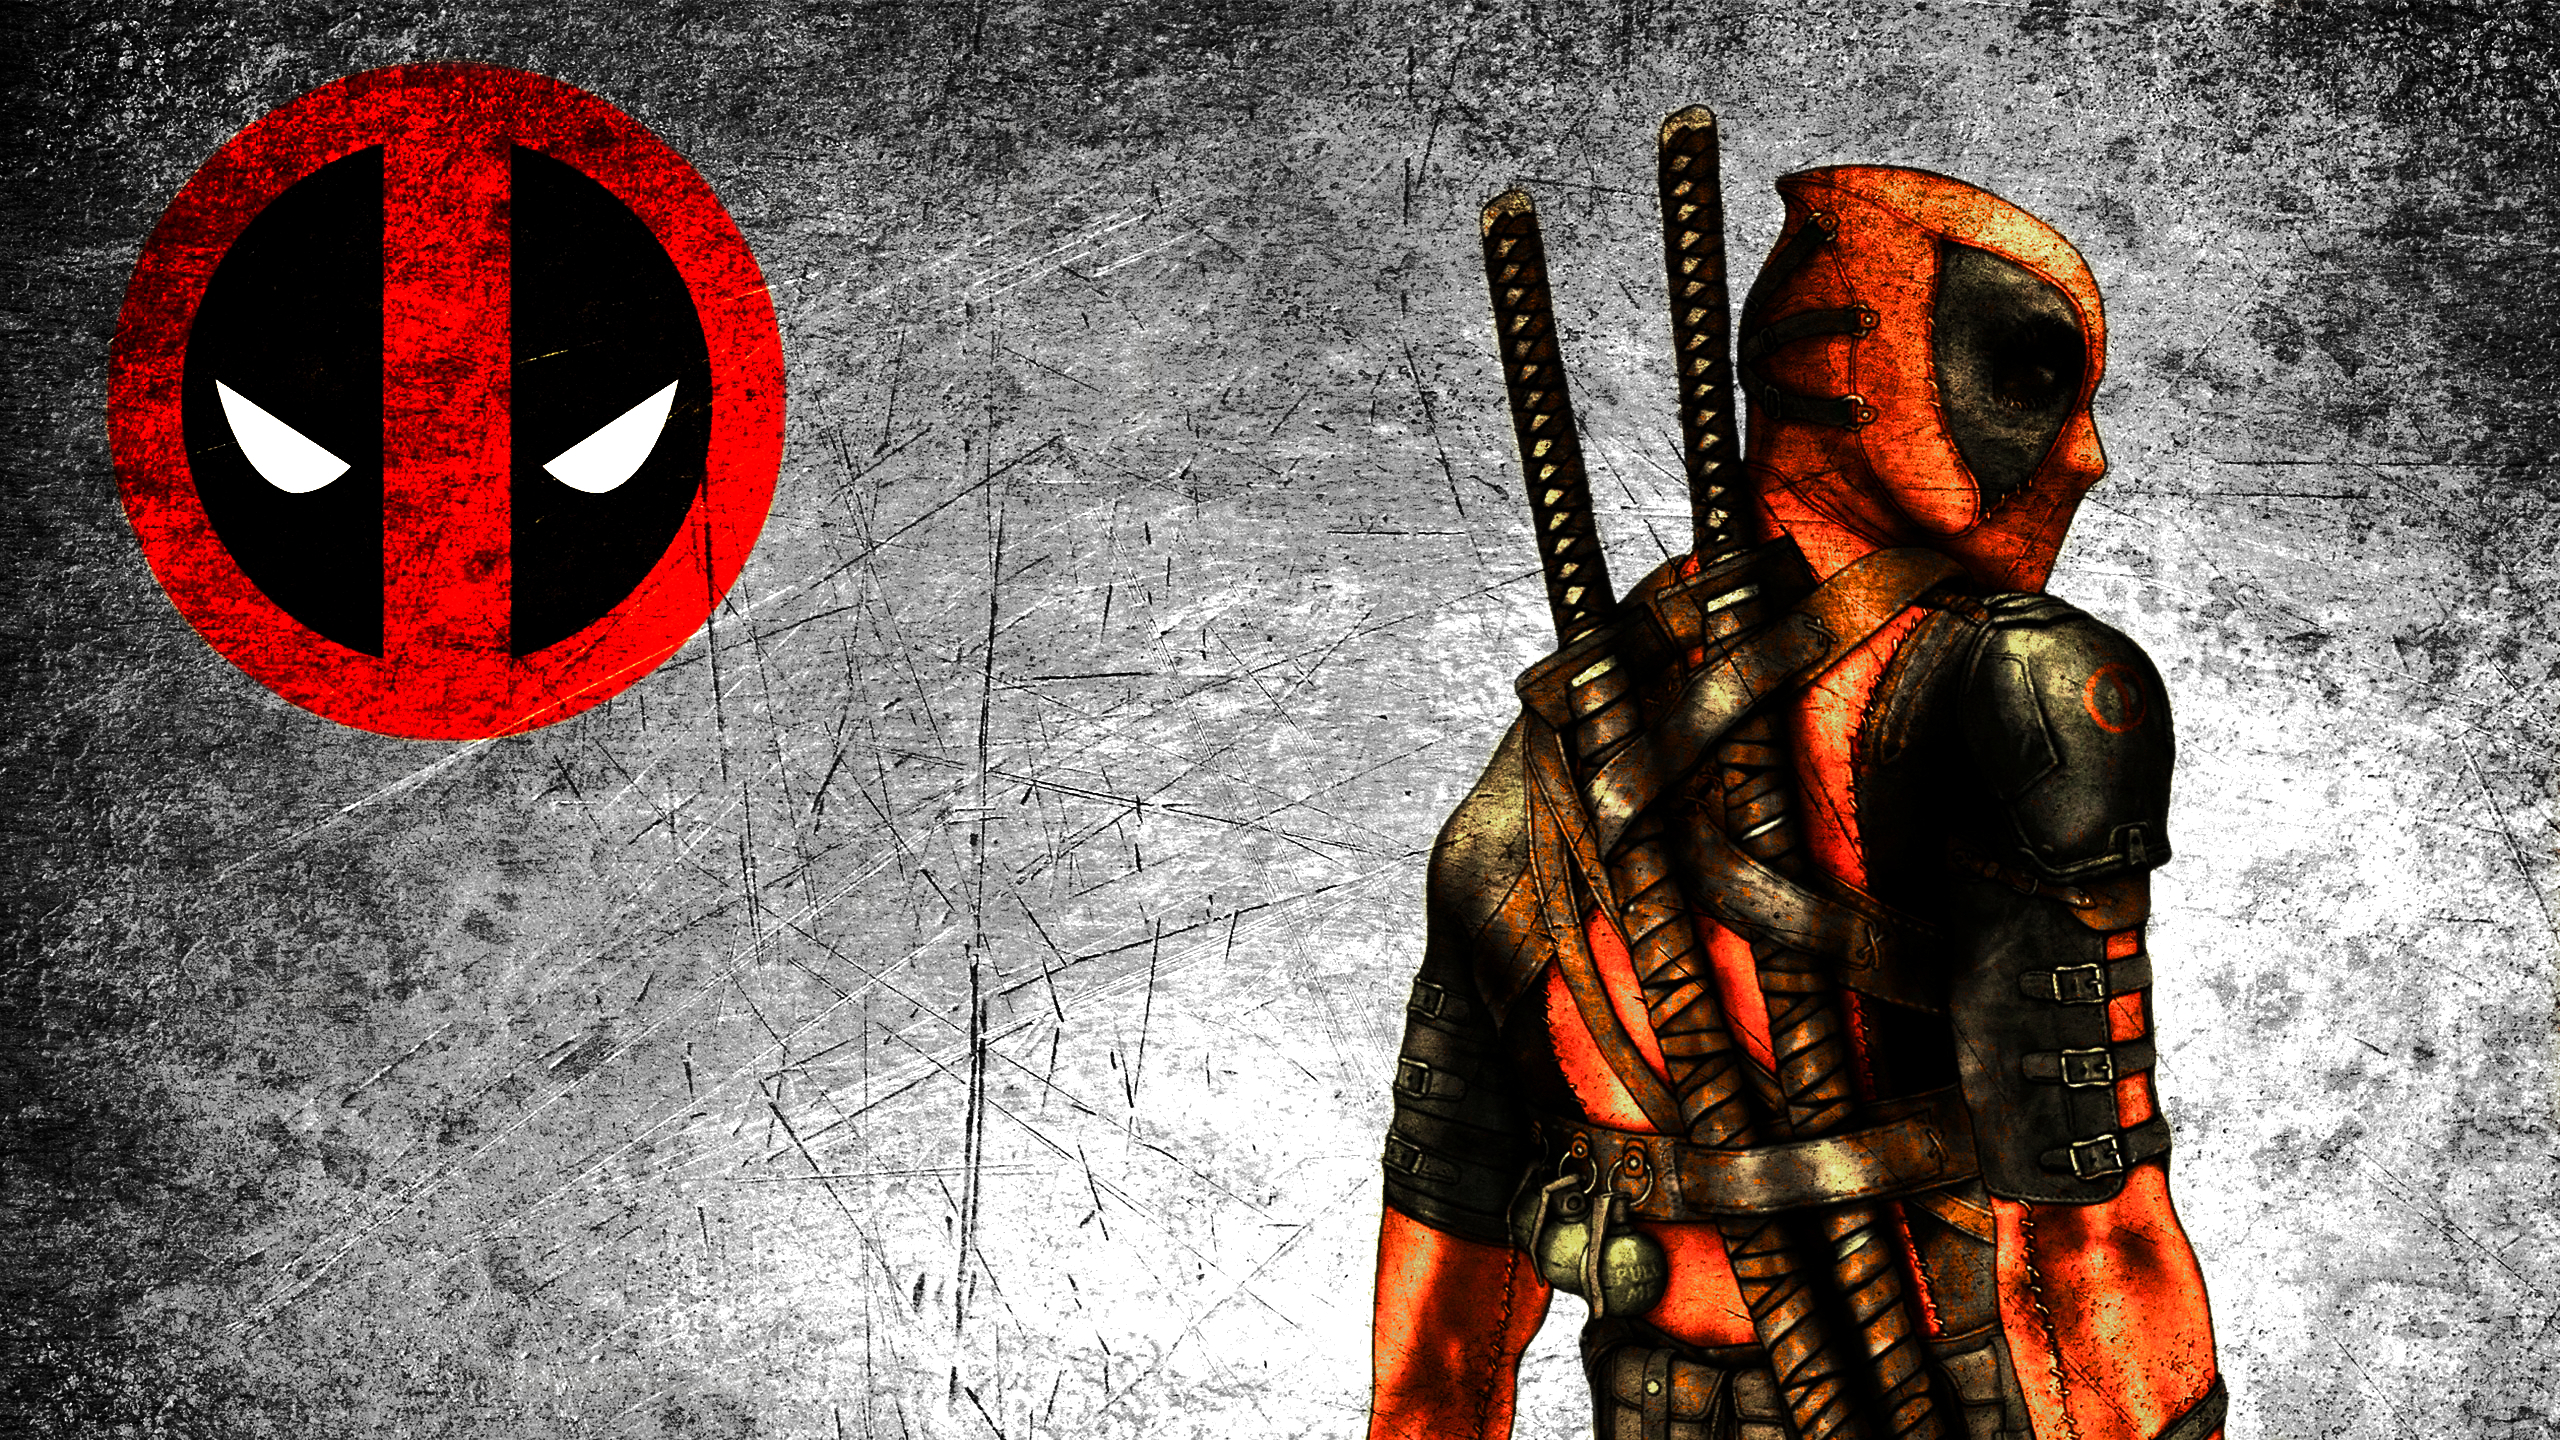 deadpool, comics, merc with a mouth wallpaper for mobile